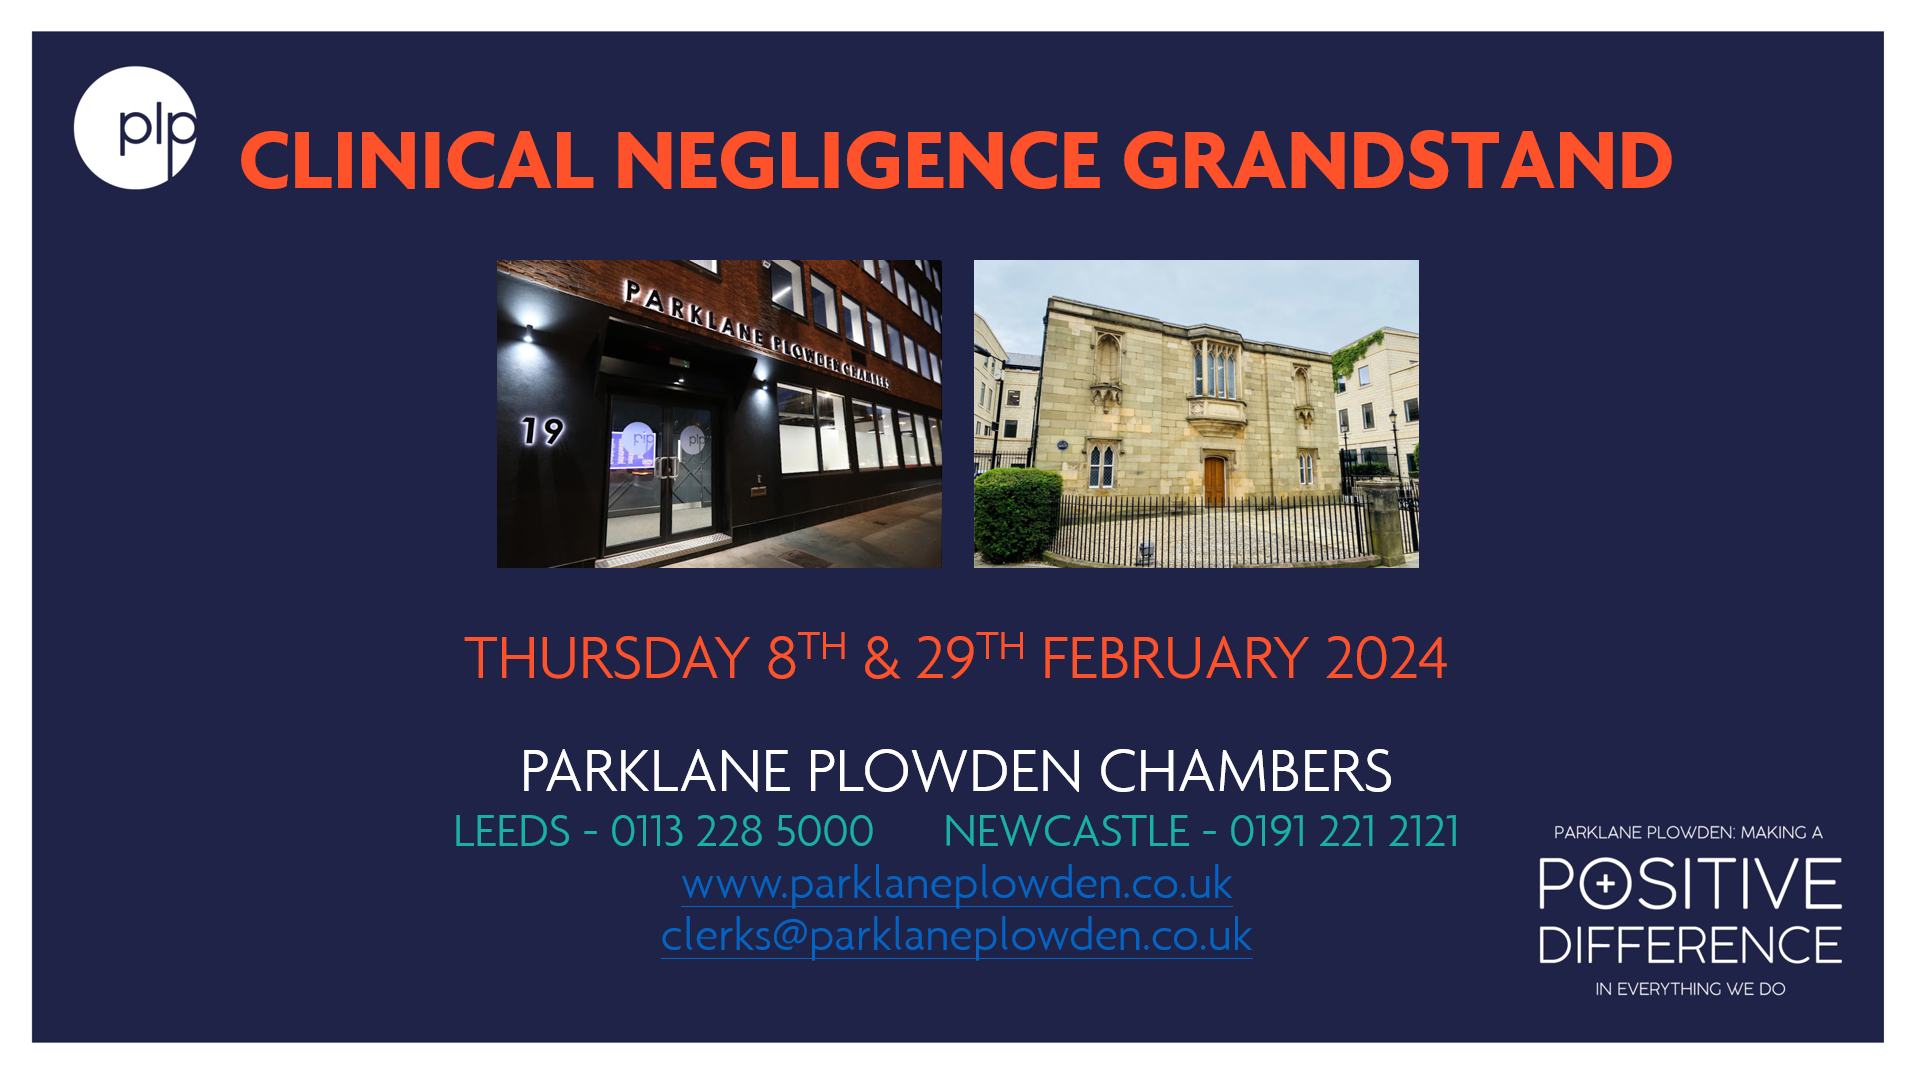 Clinical Negligence Grandstand Events